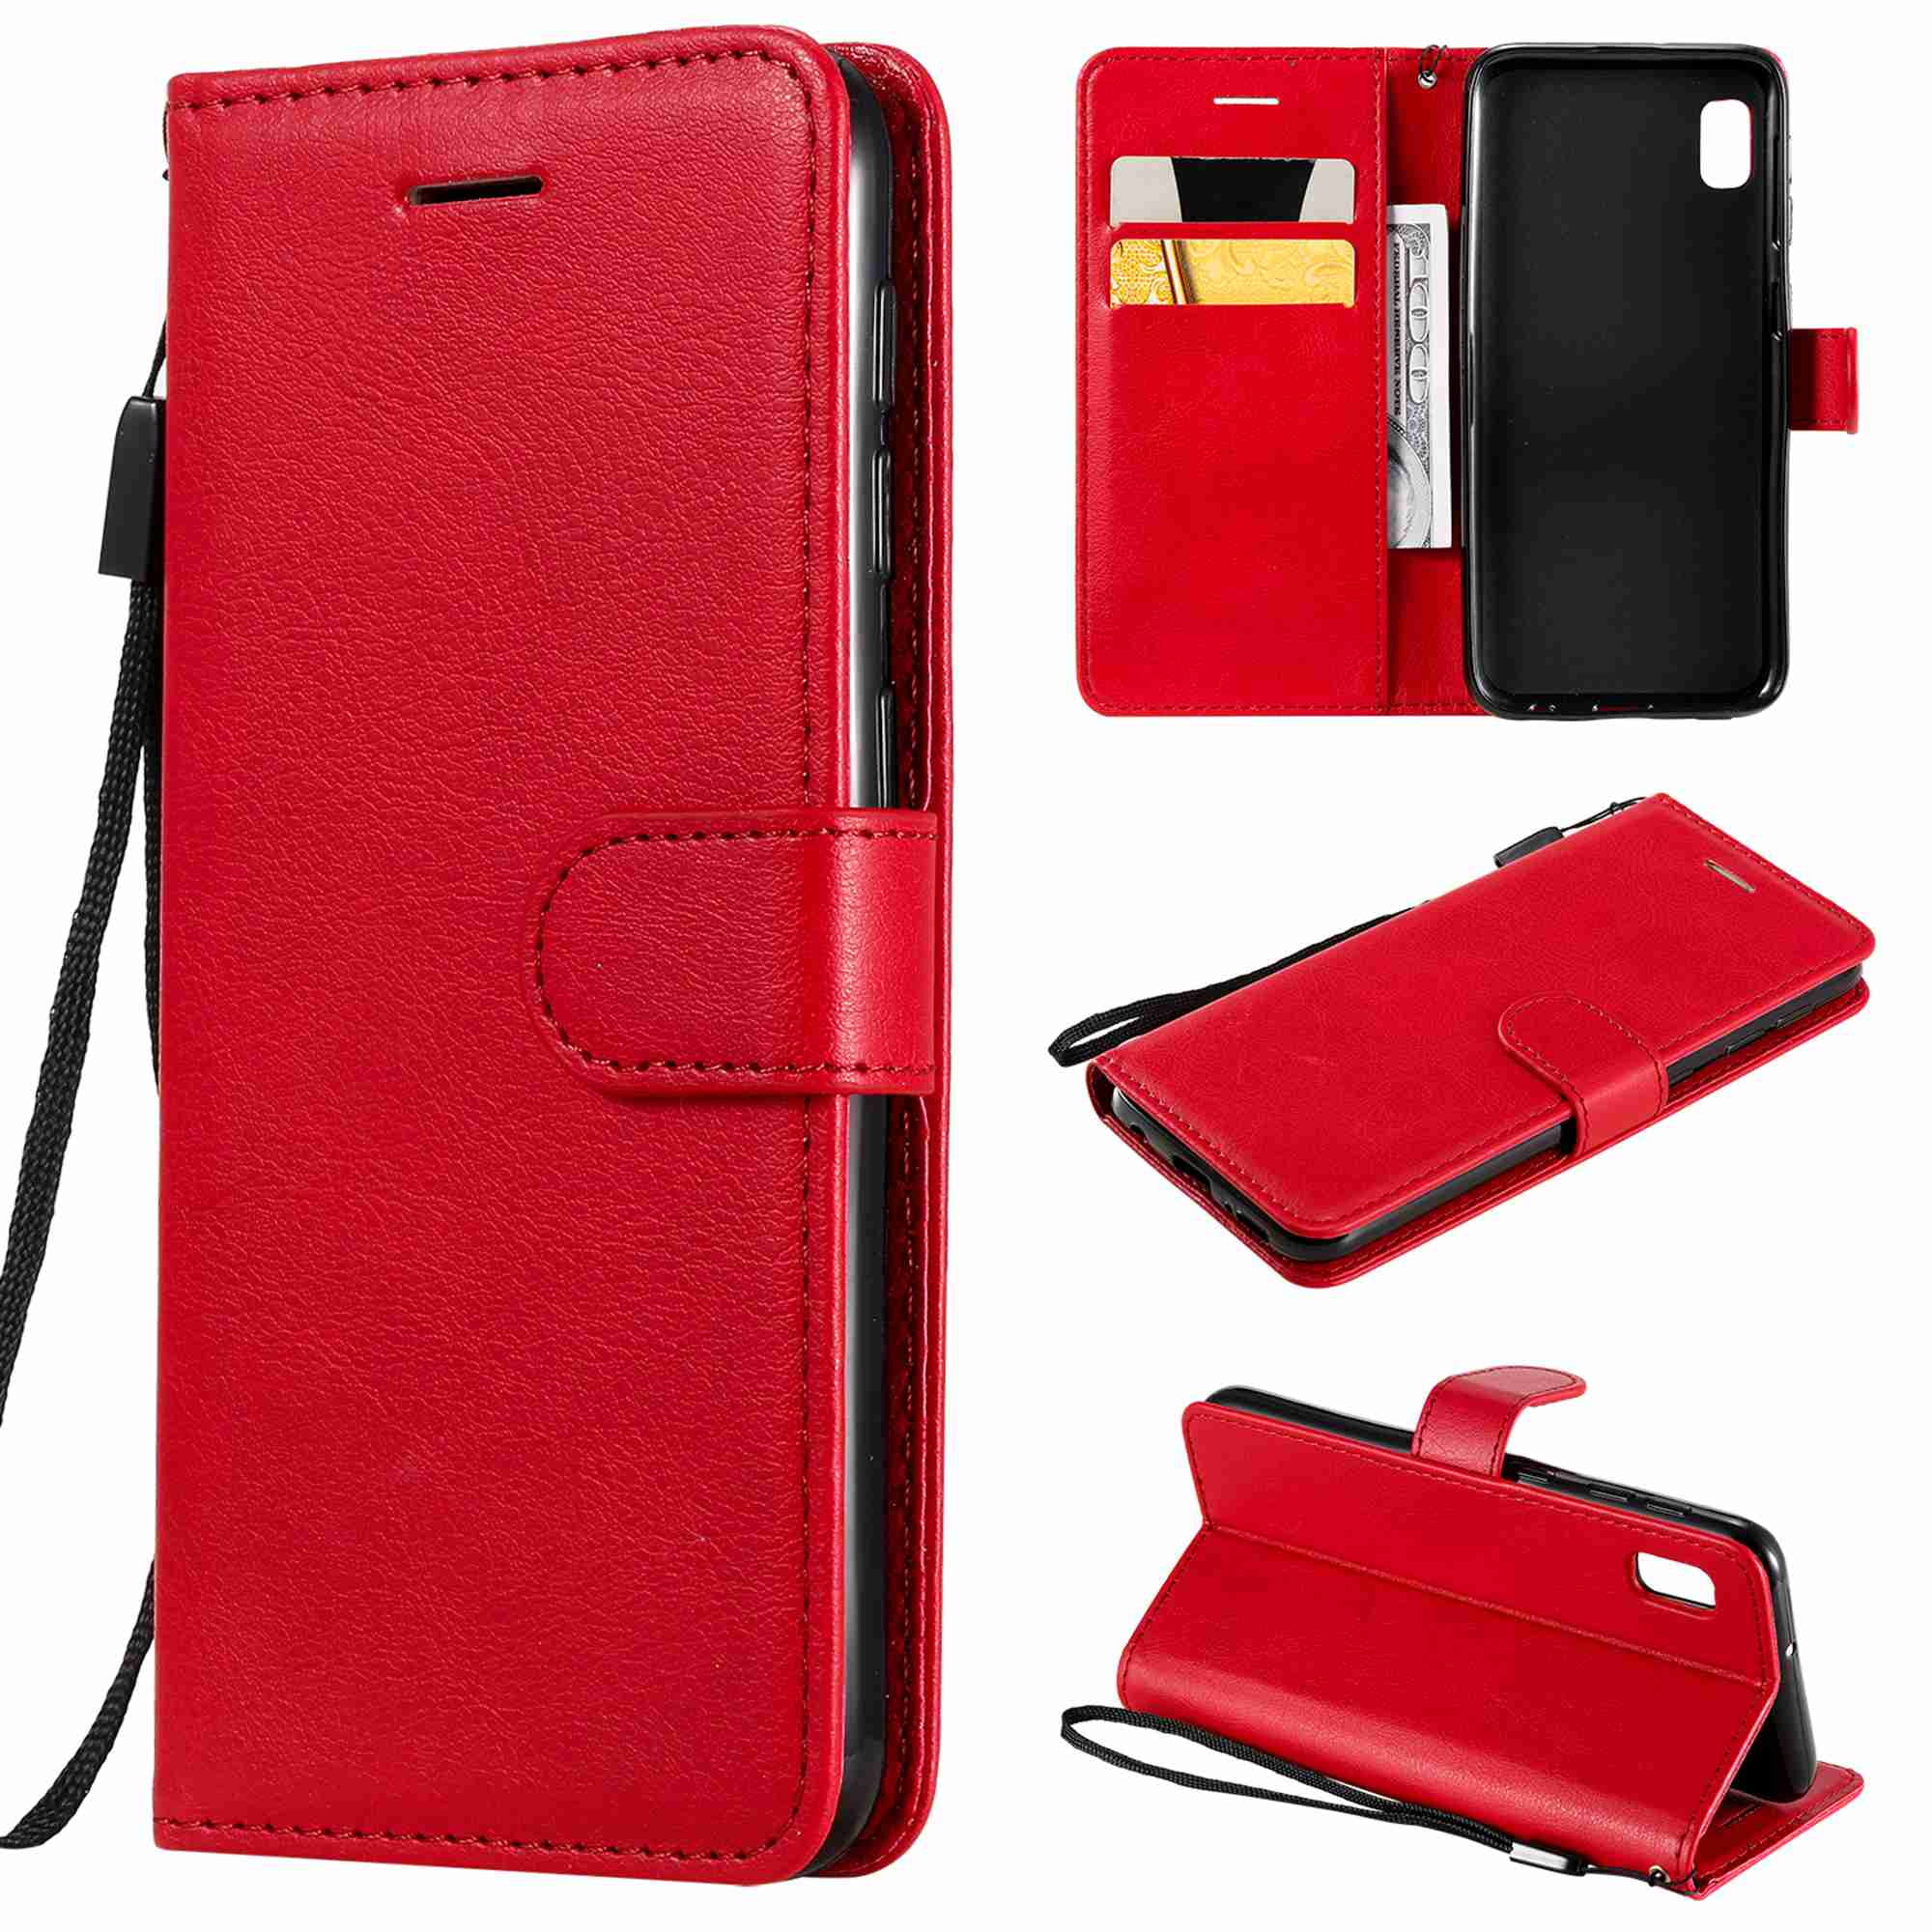 Cover for Leather Kickstand Extra-Protective Business Wallet case Card Holders Flip Cover Samsung Galaxy A70 Flip Case